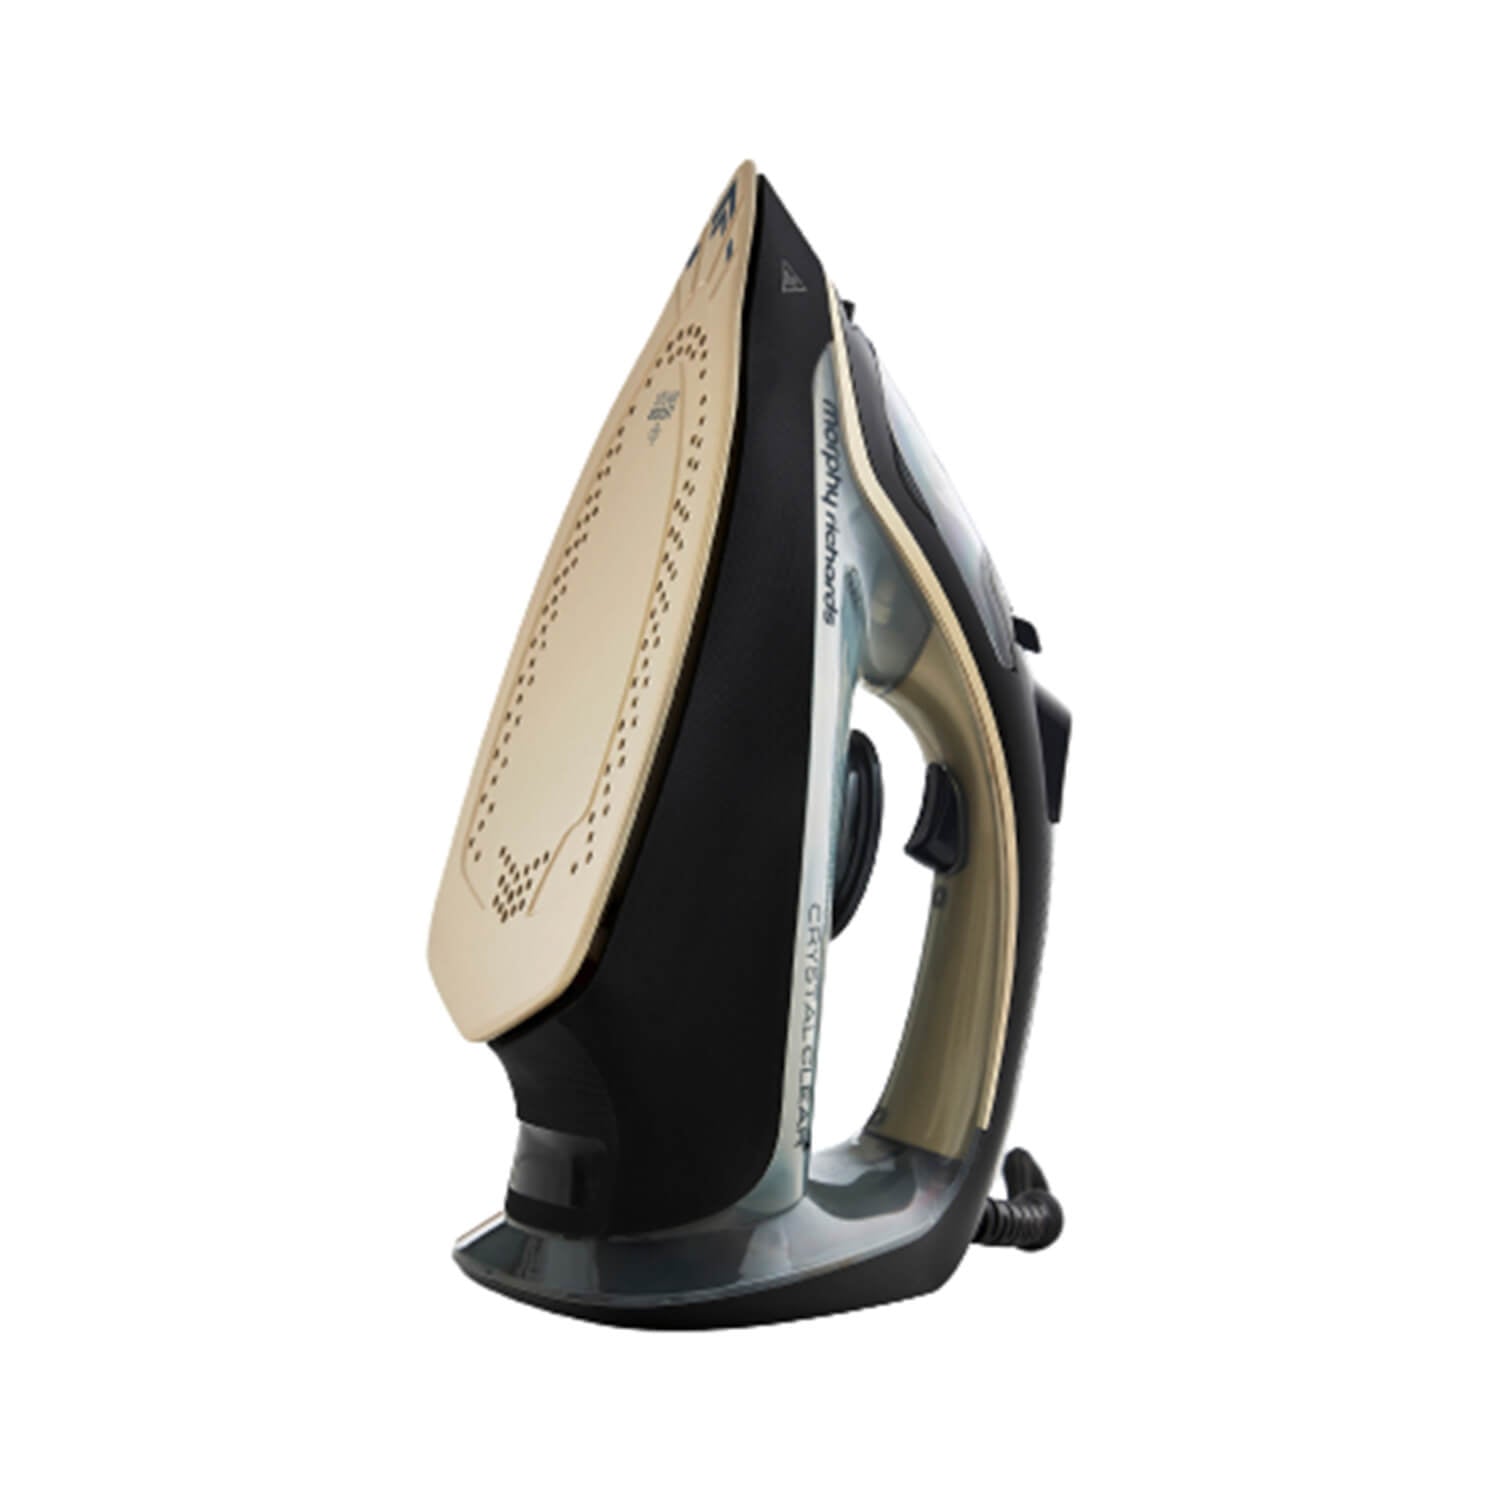 Morphy Richards Steam Iron - Gold | 300302 1 Shaws Department Stores